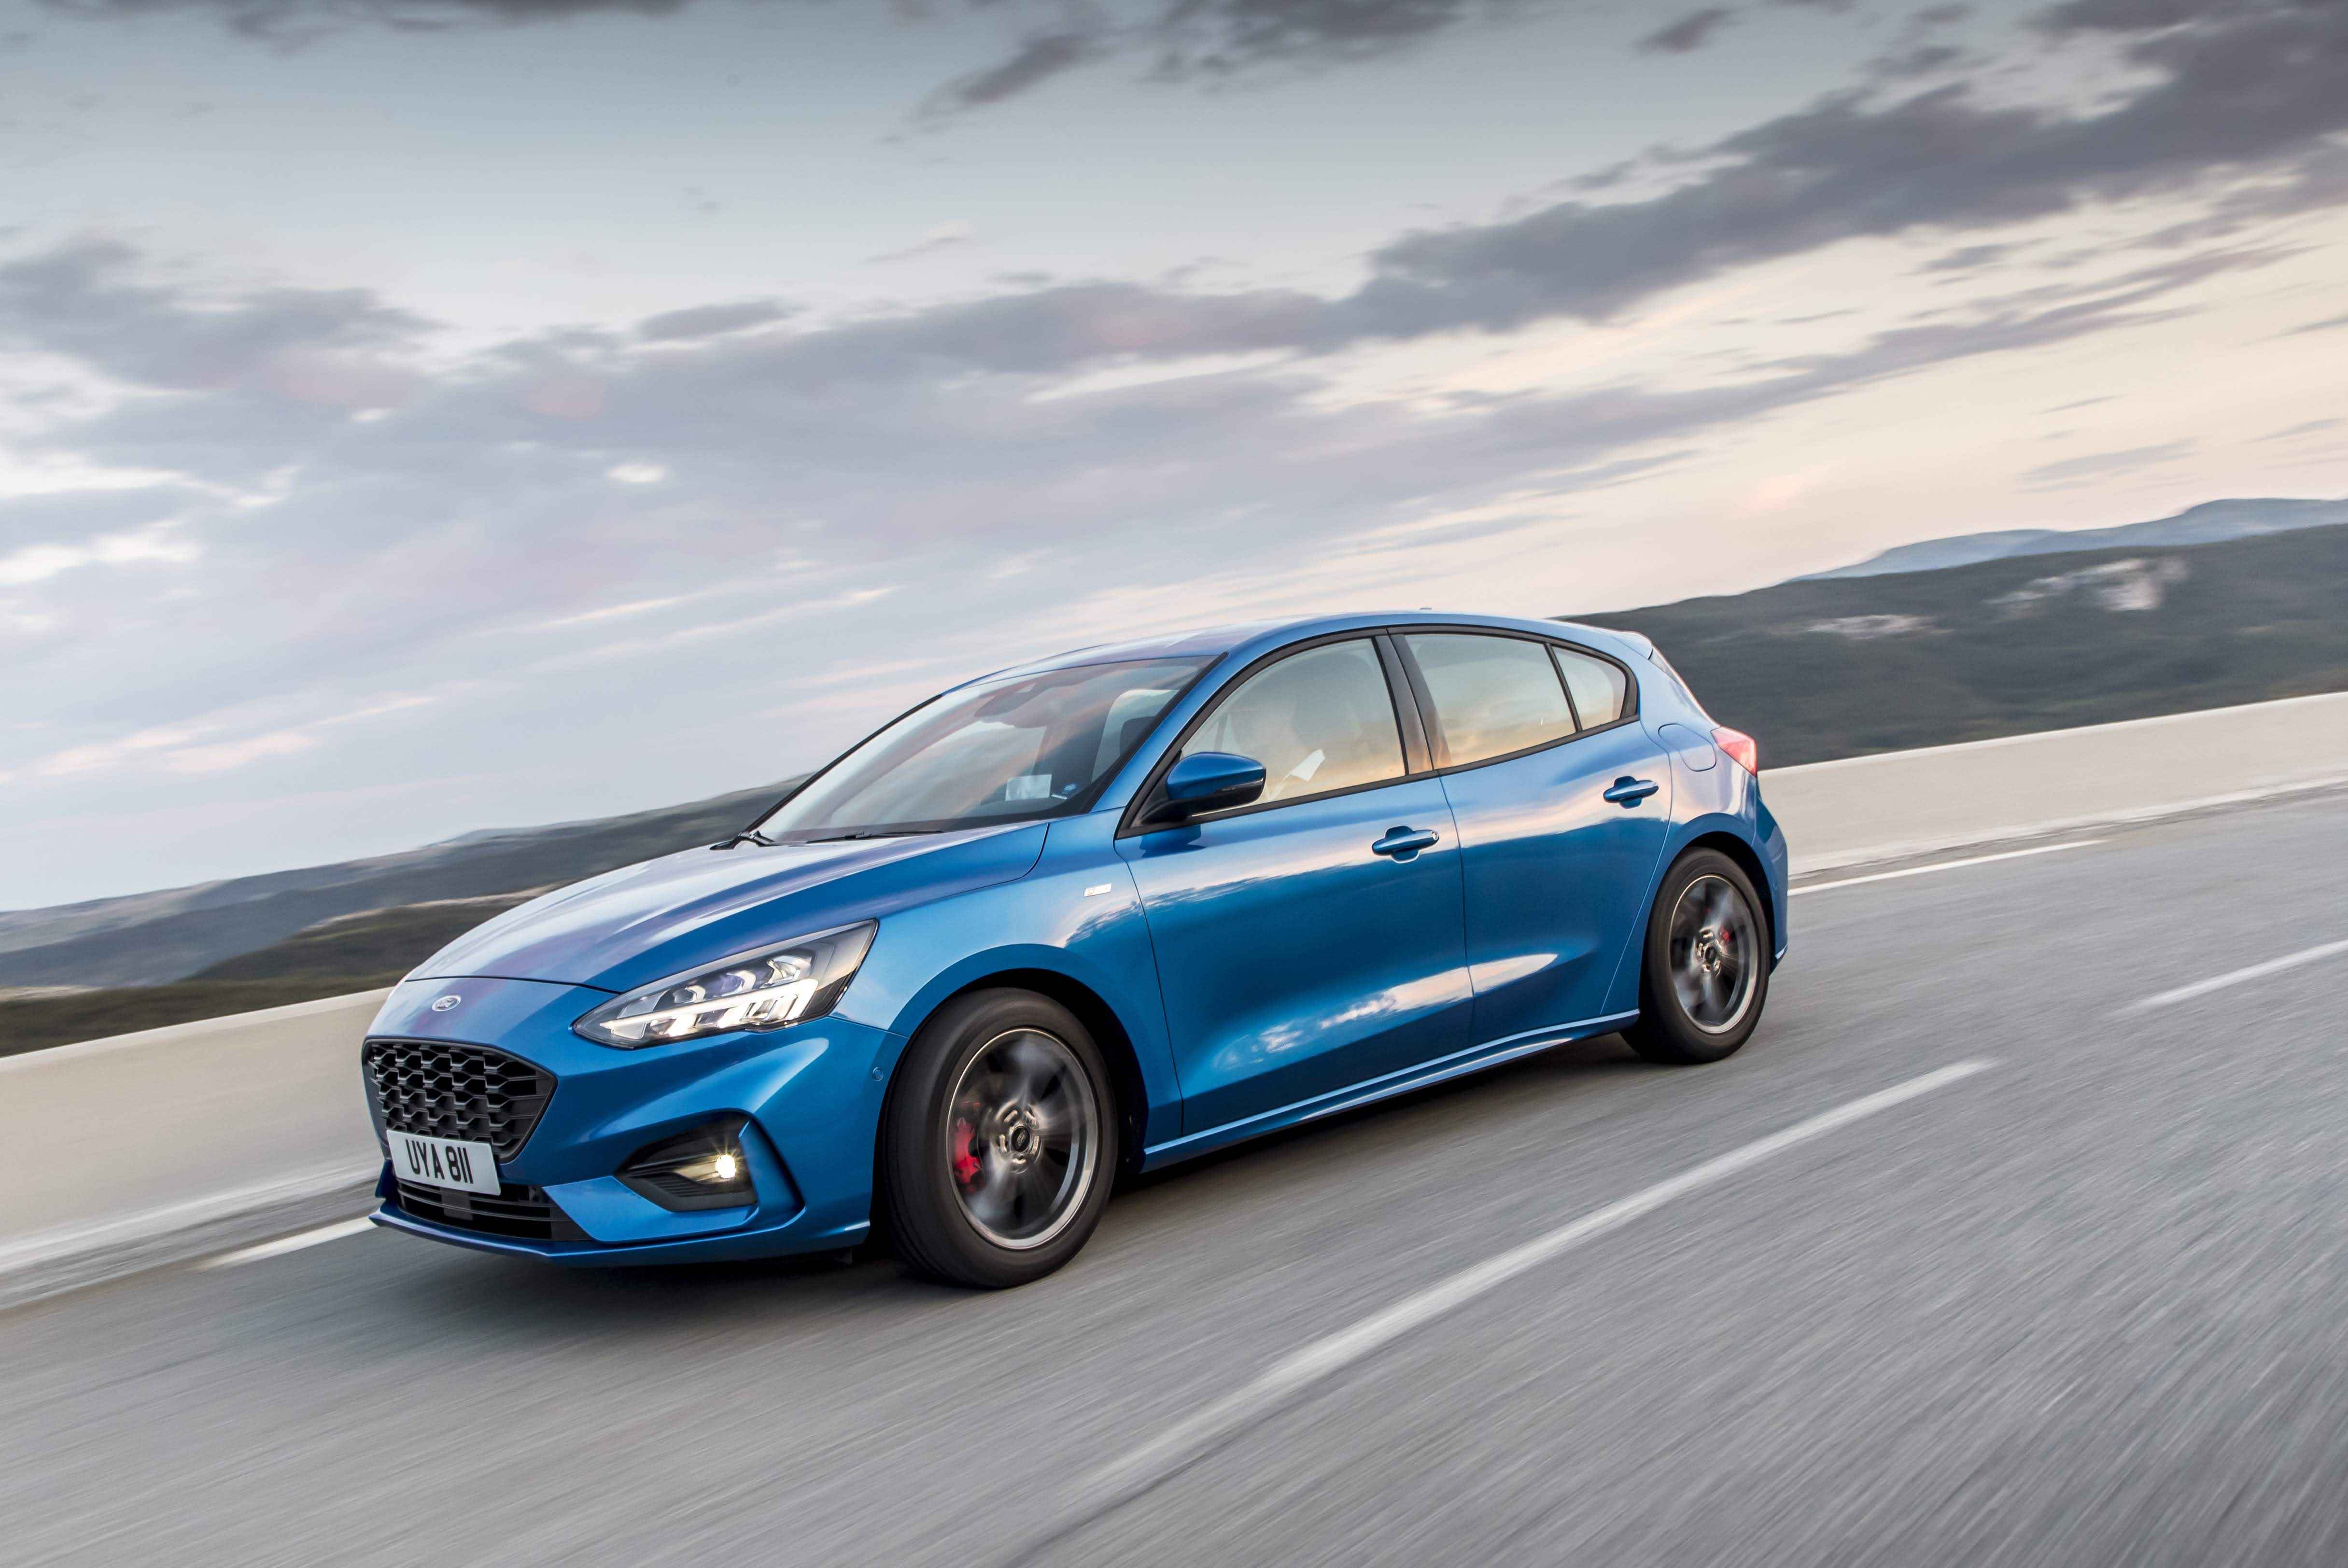 All-new Ford Focus Offers More Space Than Ever for Kids Heading